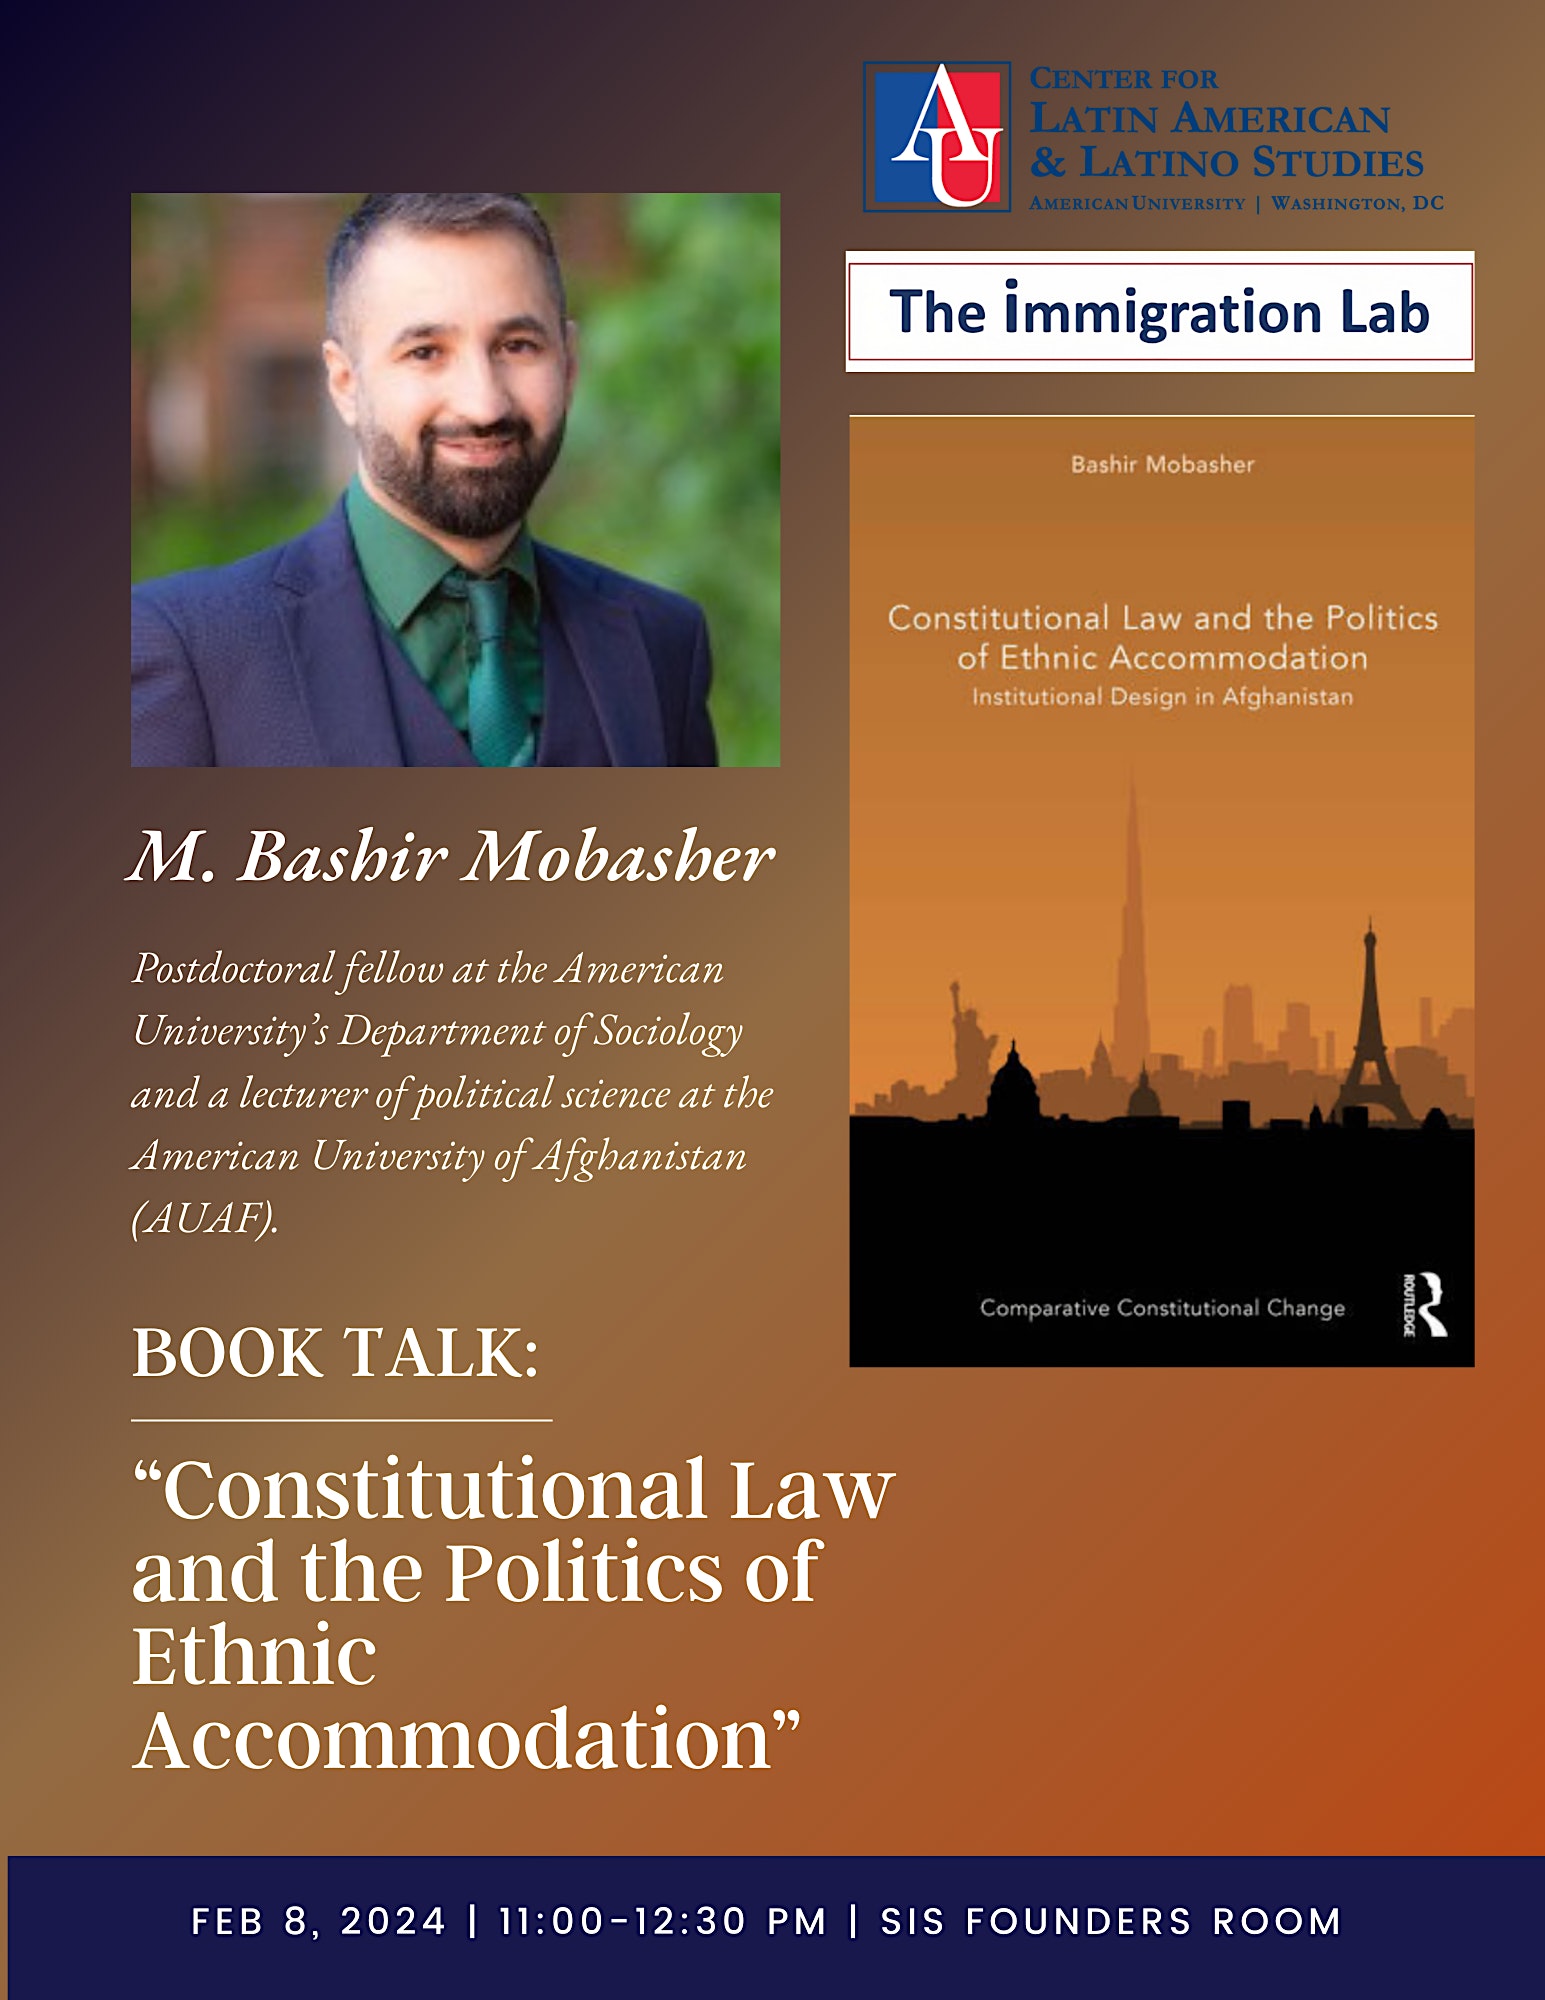 Flyer for the book talk led by Bashir Mobasher